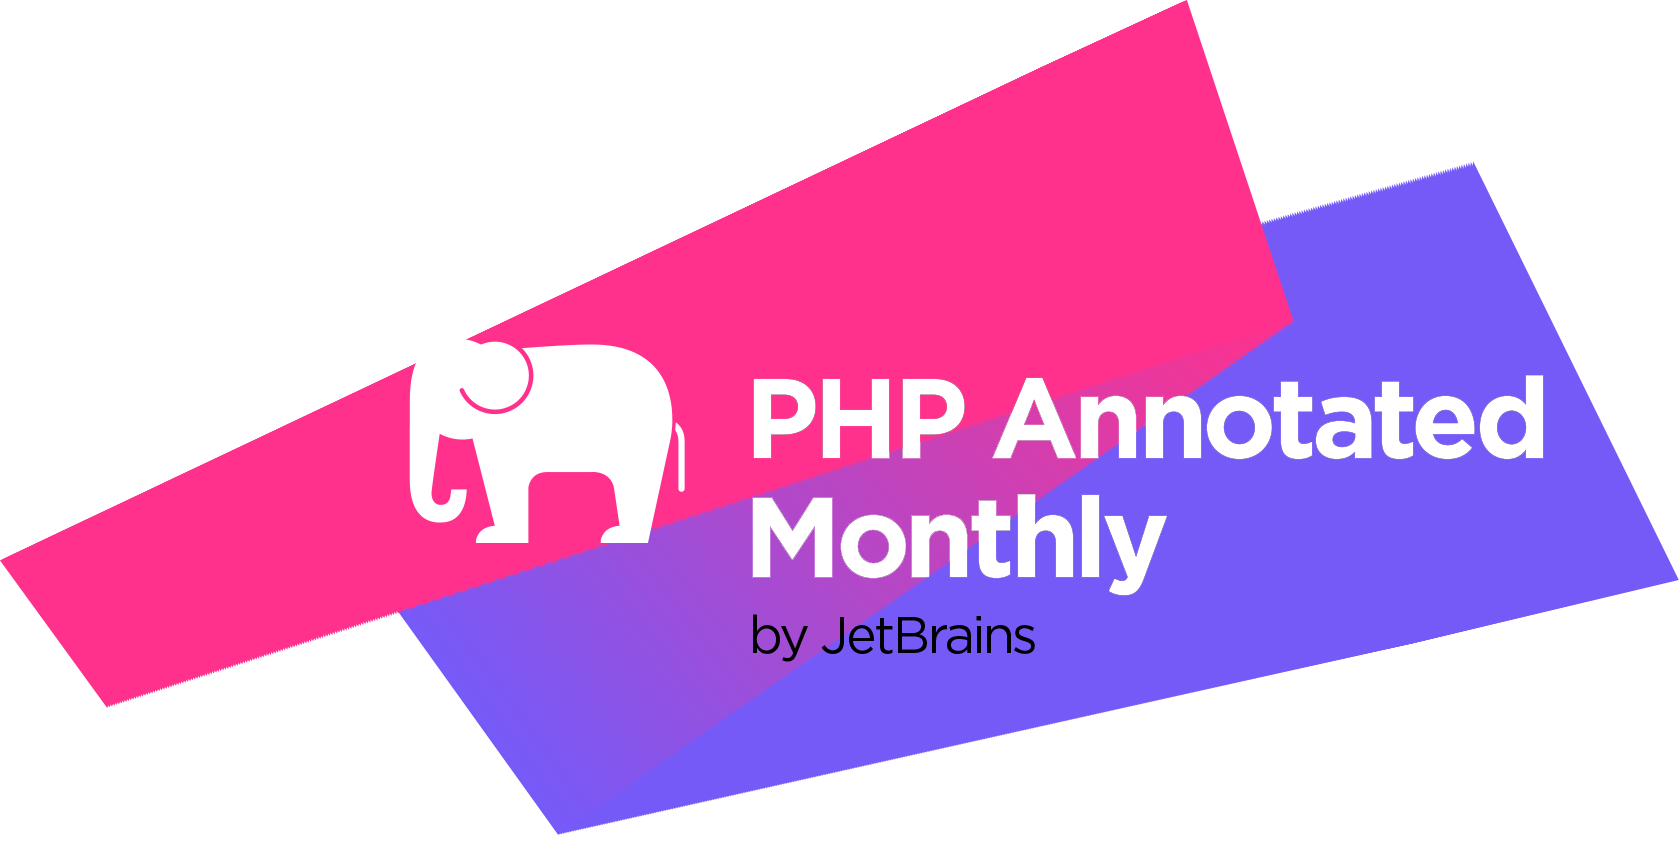 PHP Annotated Monthly